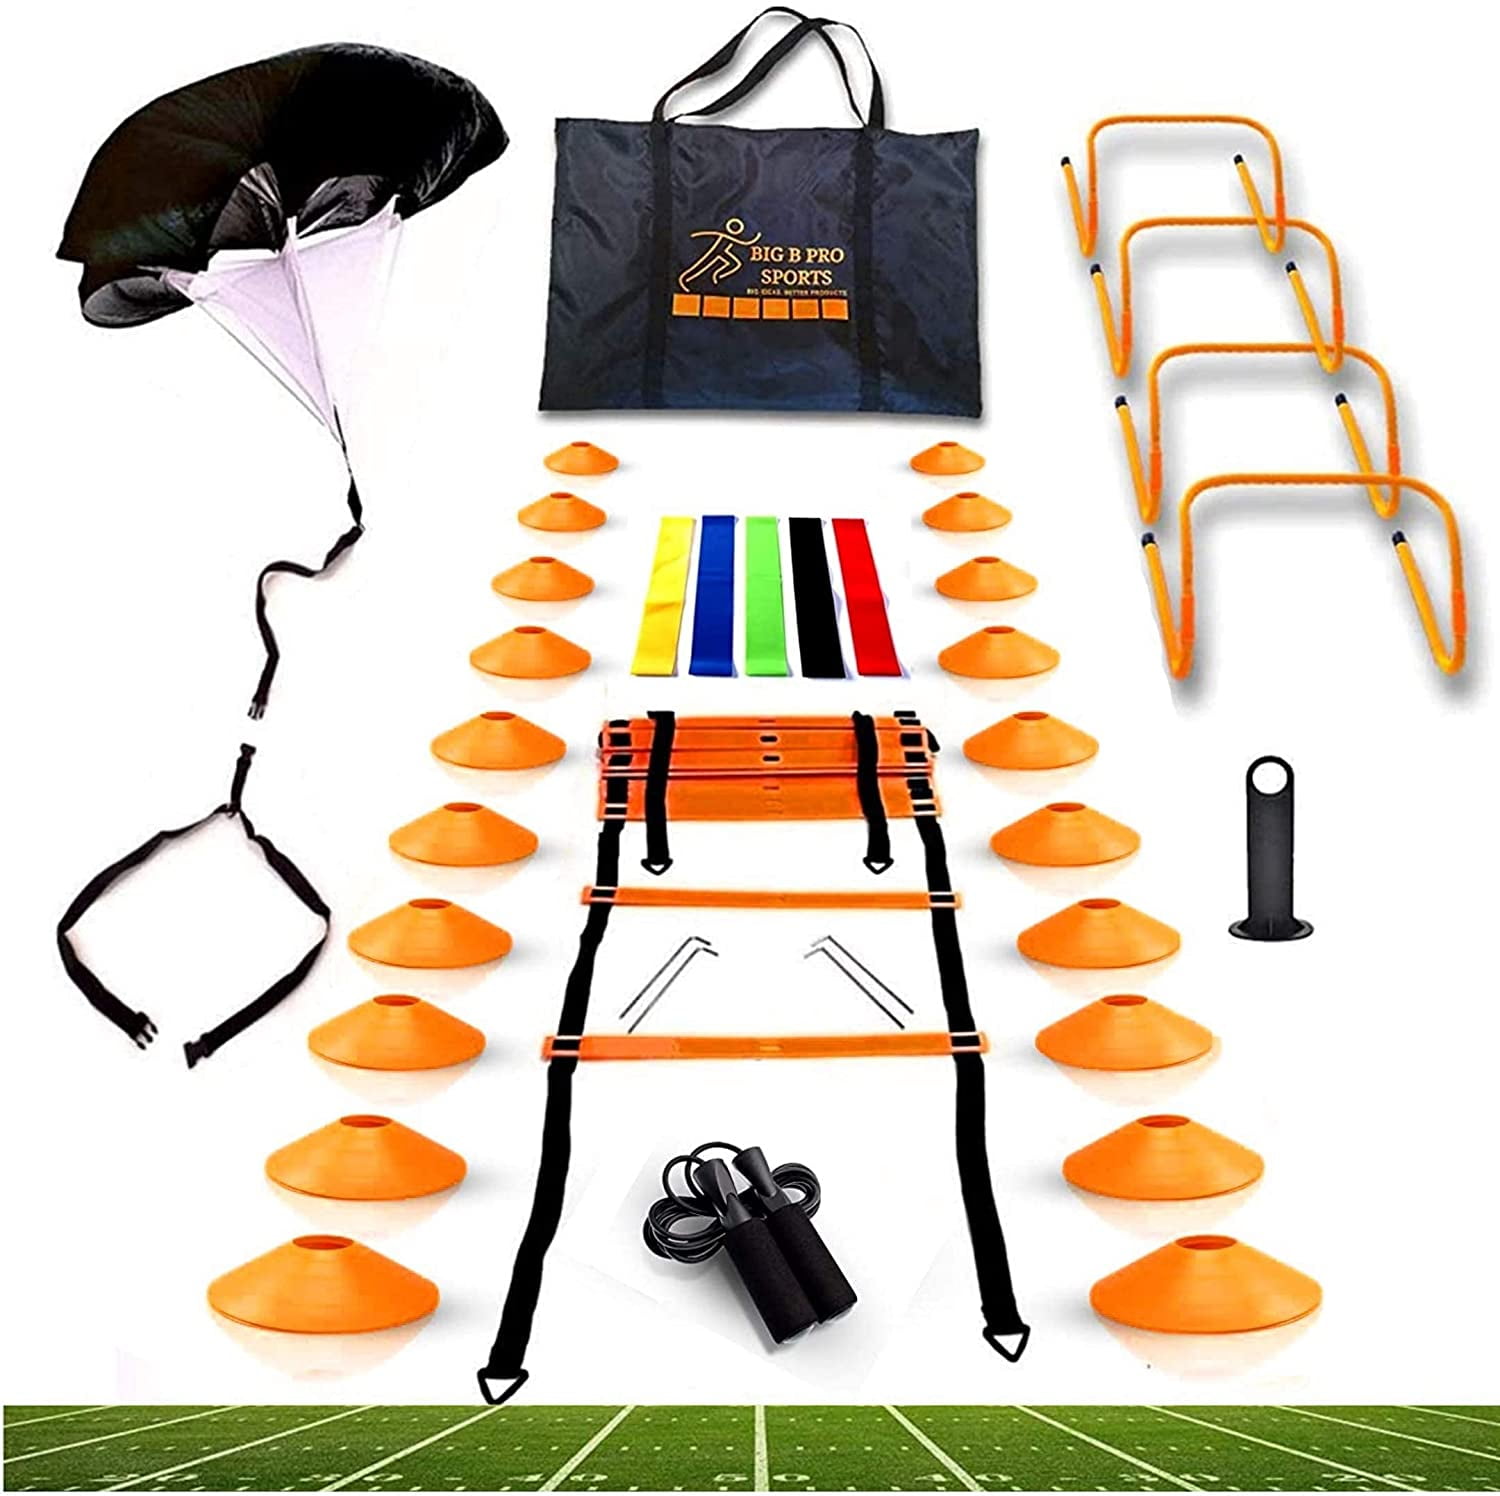 Speed Cones Training & 20ft Agility Ladder Set Lacrosse with Carry Bag Exercise Workout Equipment to Boost Fitness & Increase Quick Footwork Hockey & Basketball Kit for Soccer 